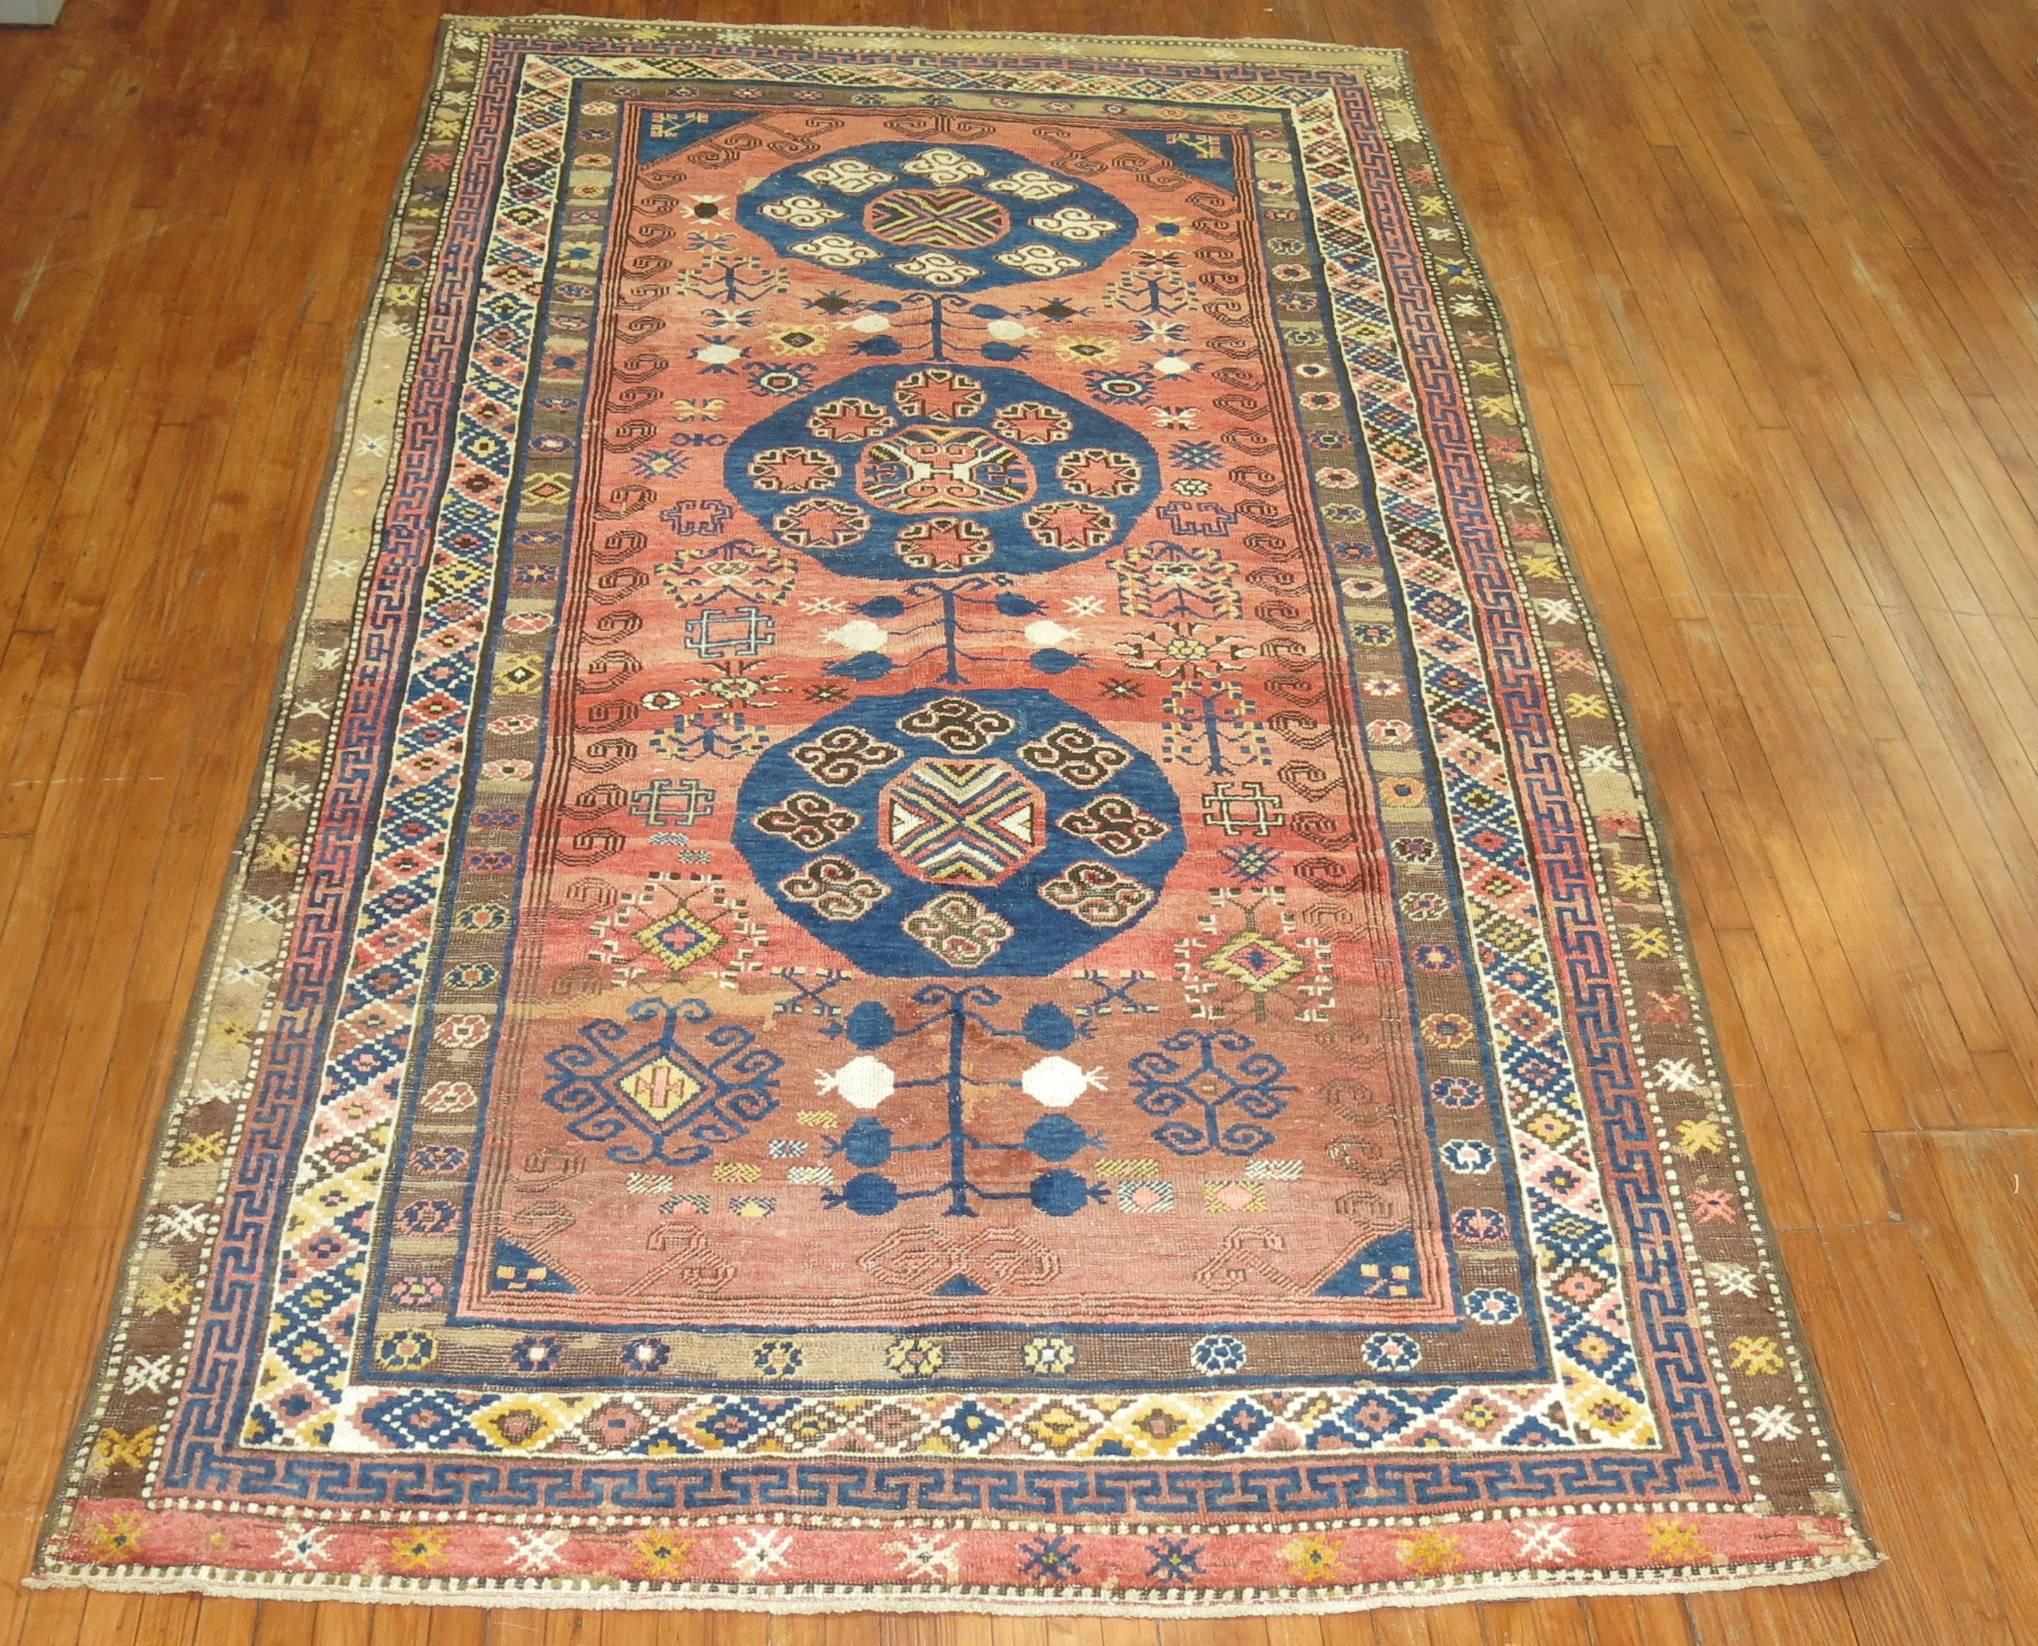 Mid-20th century Turkish village rug derived from a 19th century Asian Khotan rug. The pile construction is thicker giving the rug more durability and longevity. The weave did an amazing job with colors and graphic on the rug.